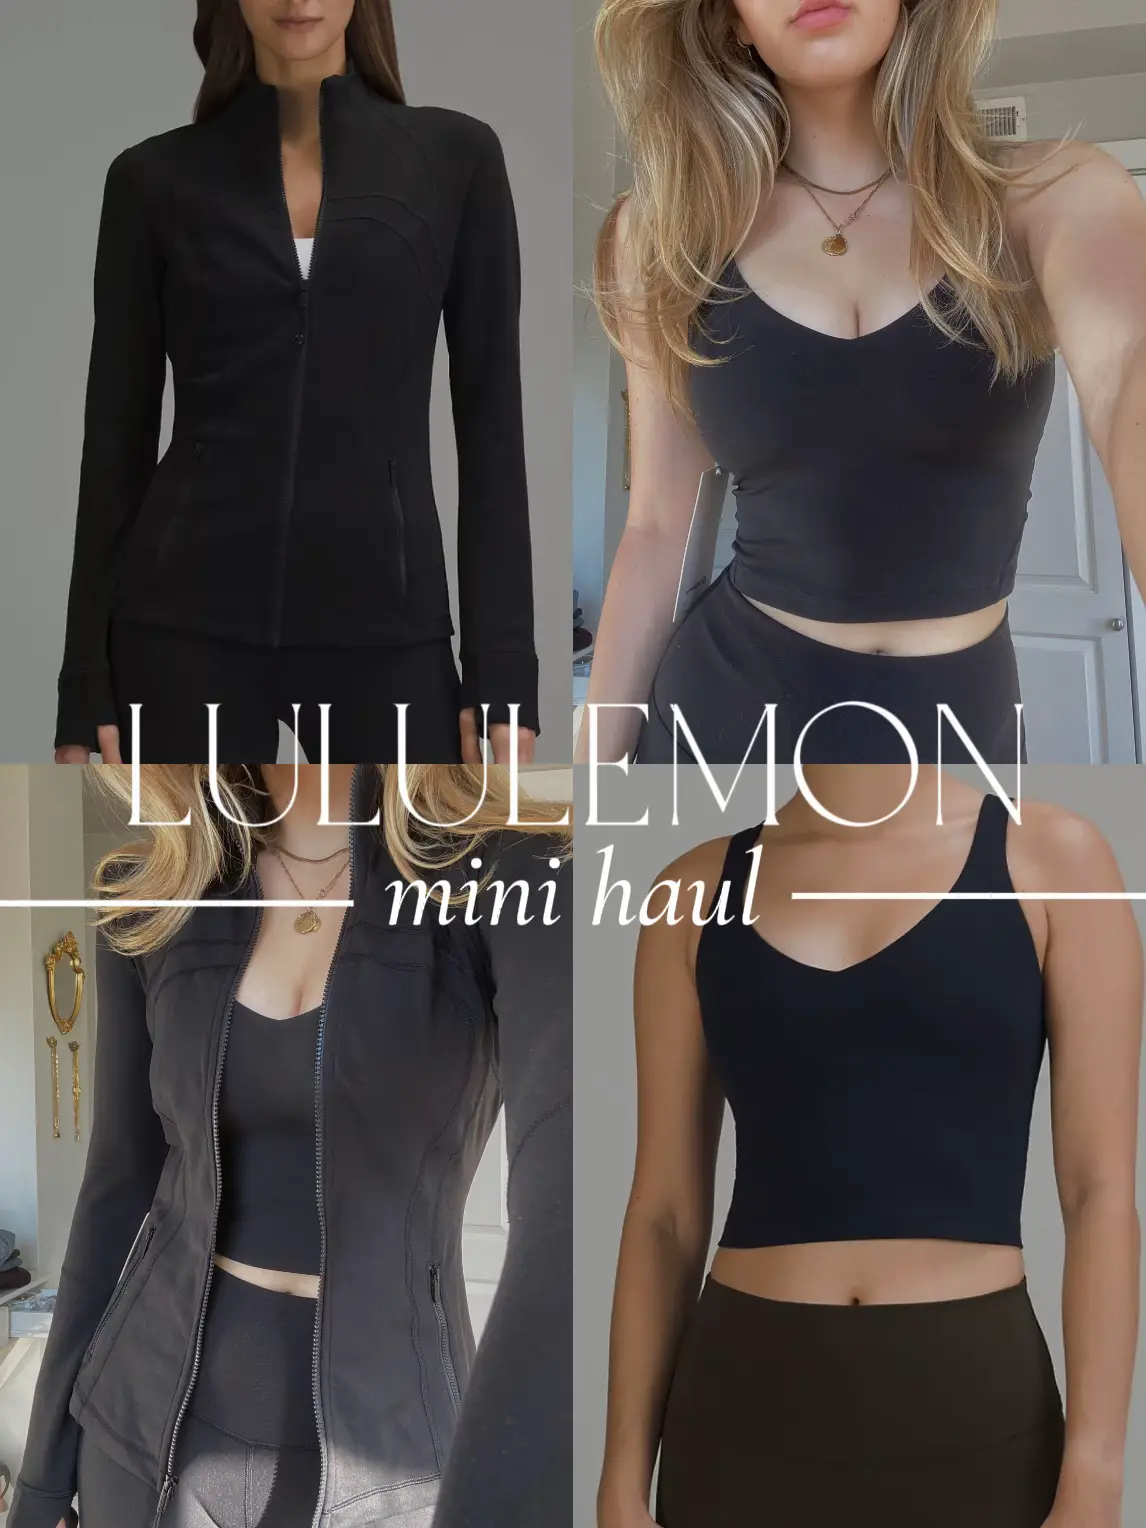 lululemon dupe??, Gallery posted by michelle.belle